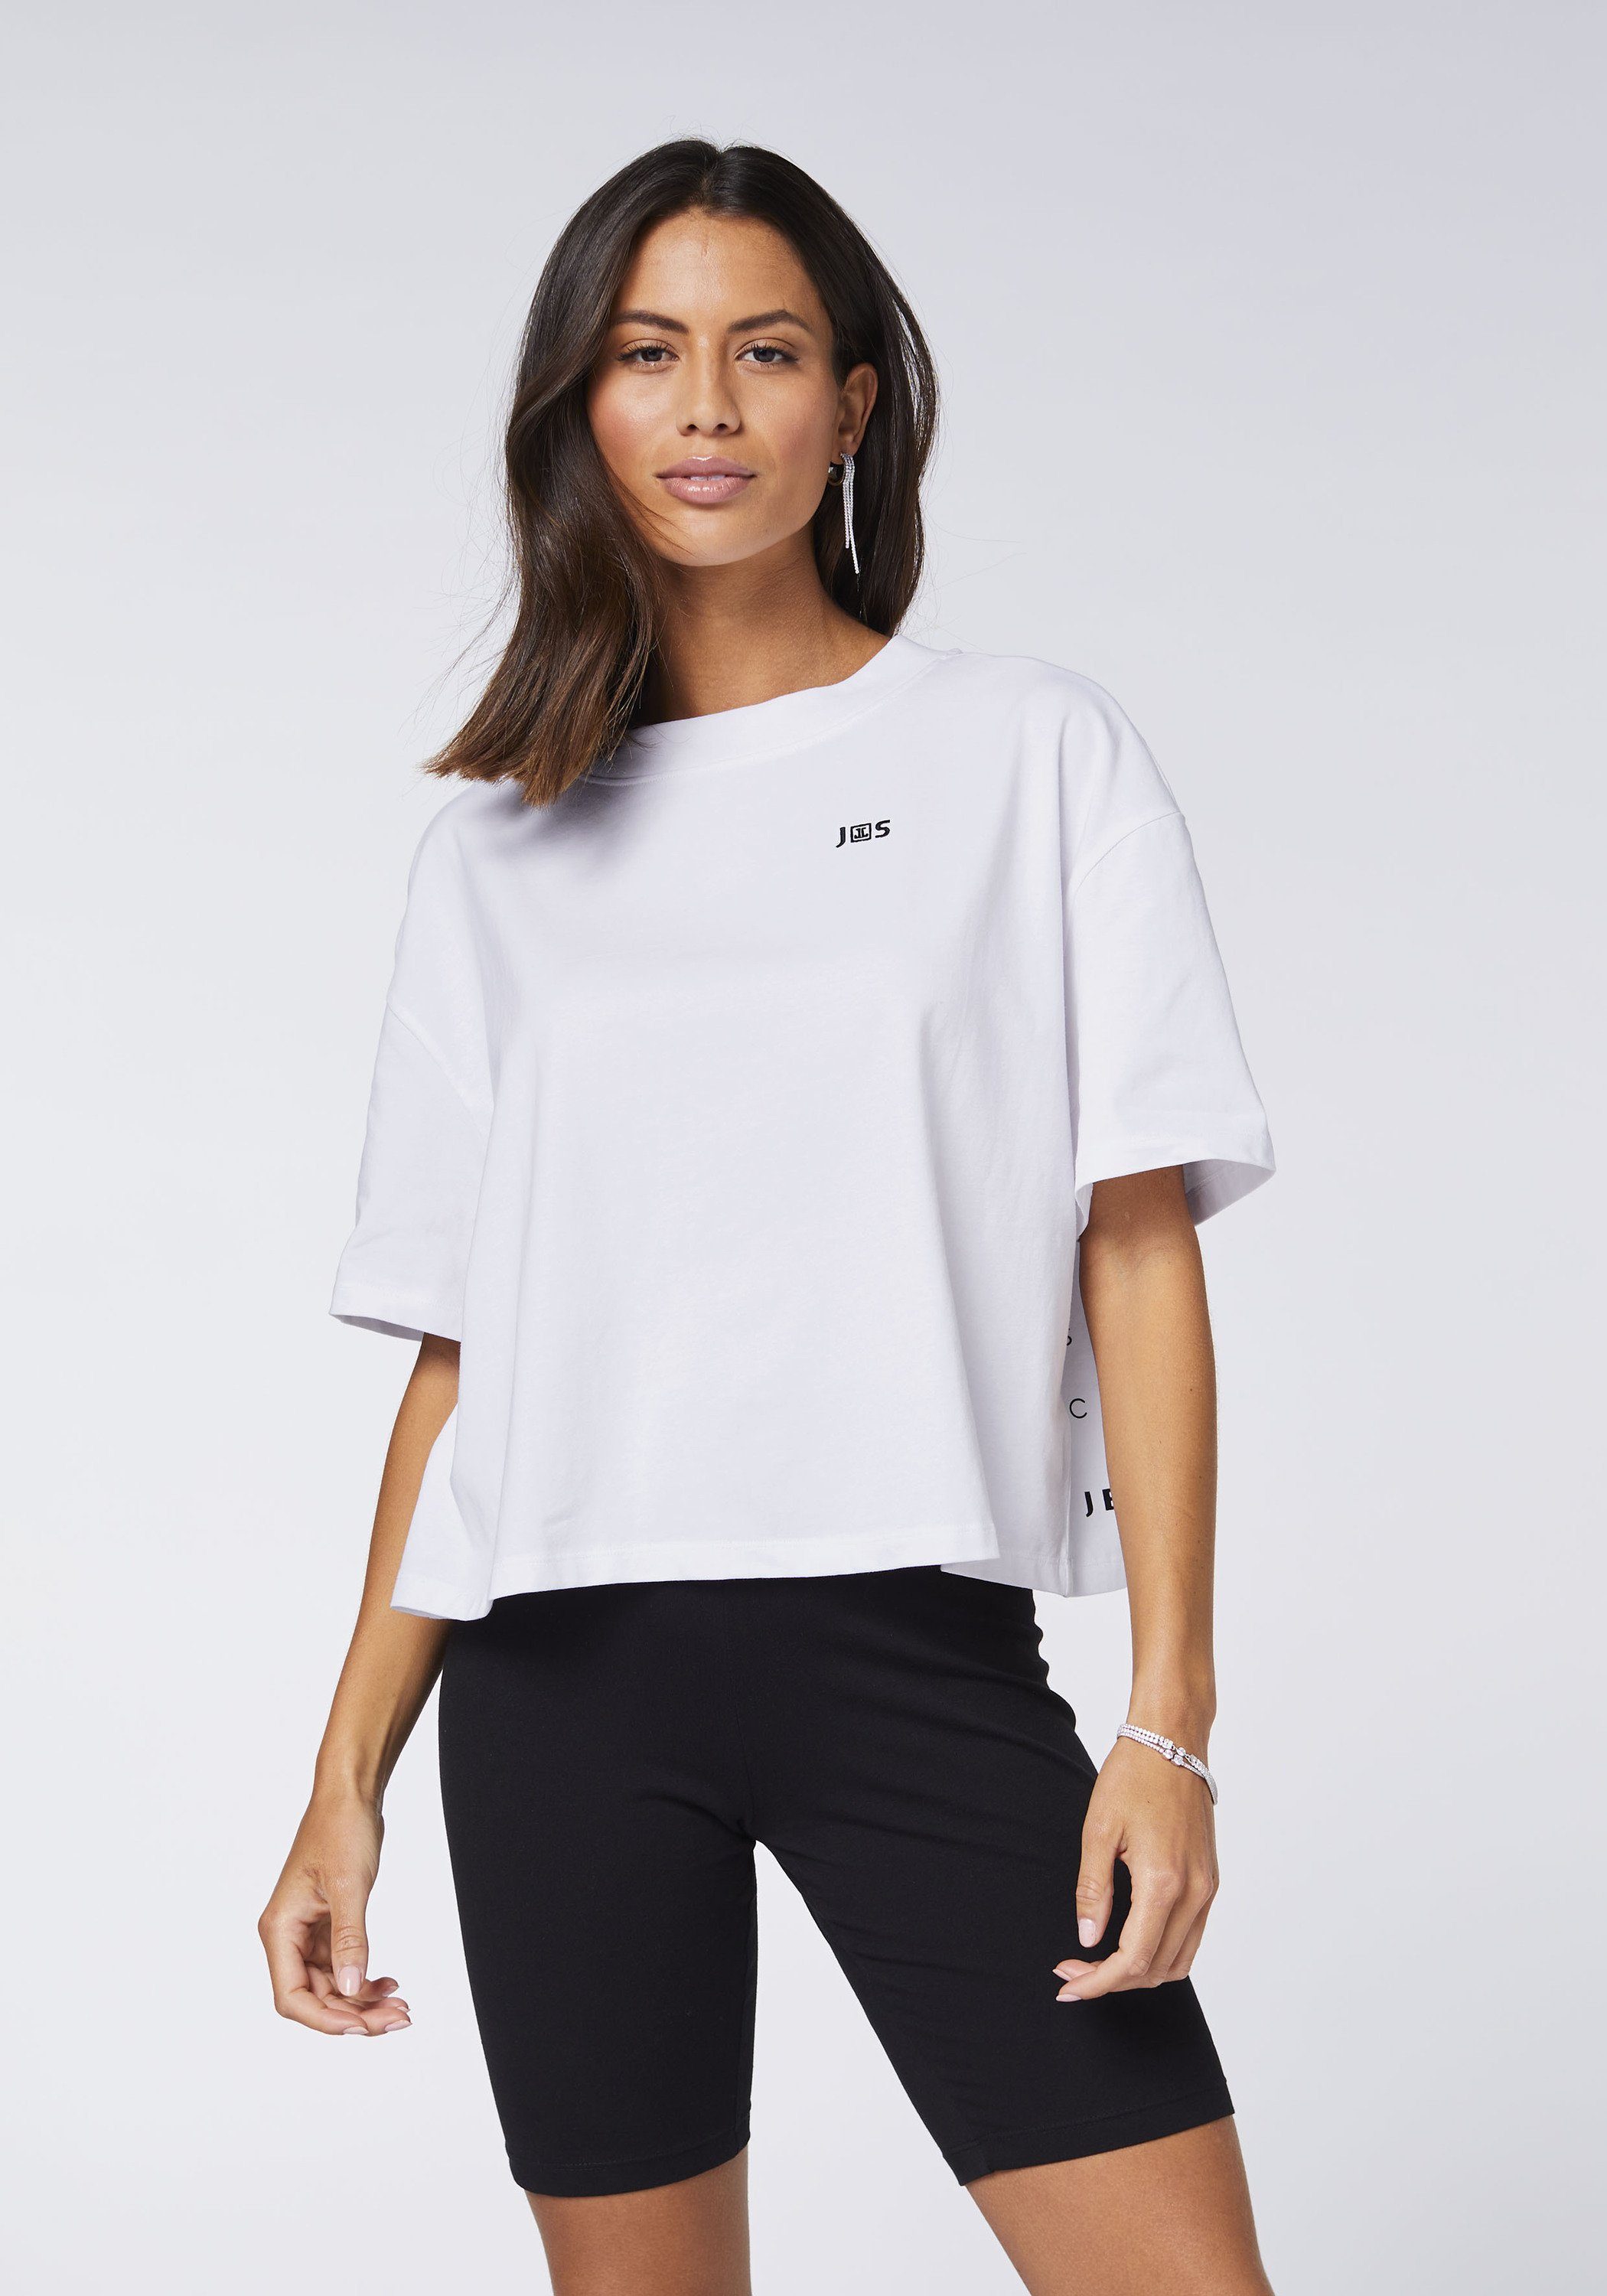 Bright cropped JETTE Print-Shirt 11-0601 in Länge White SPORT